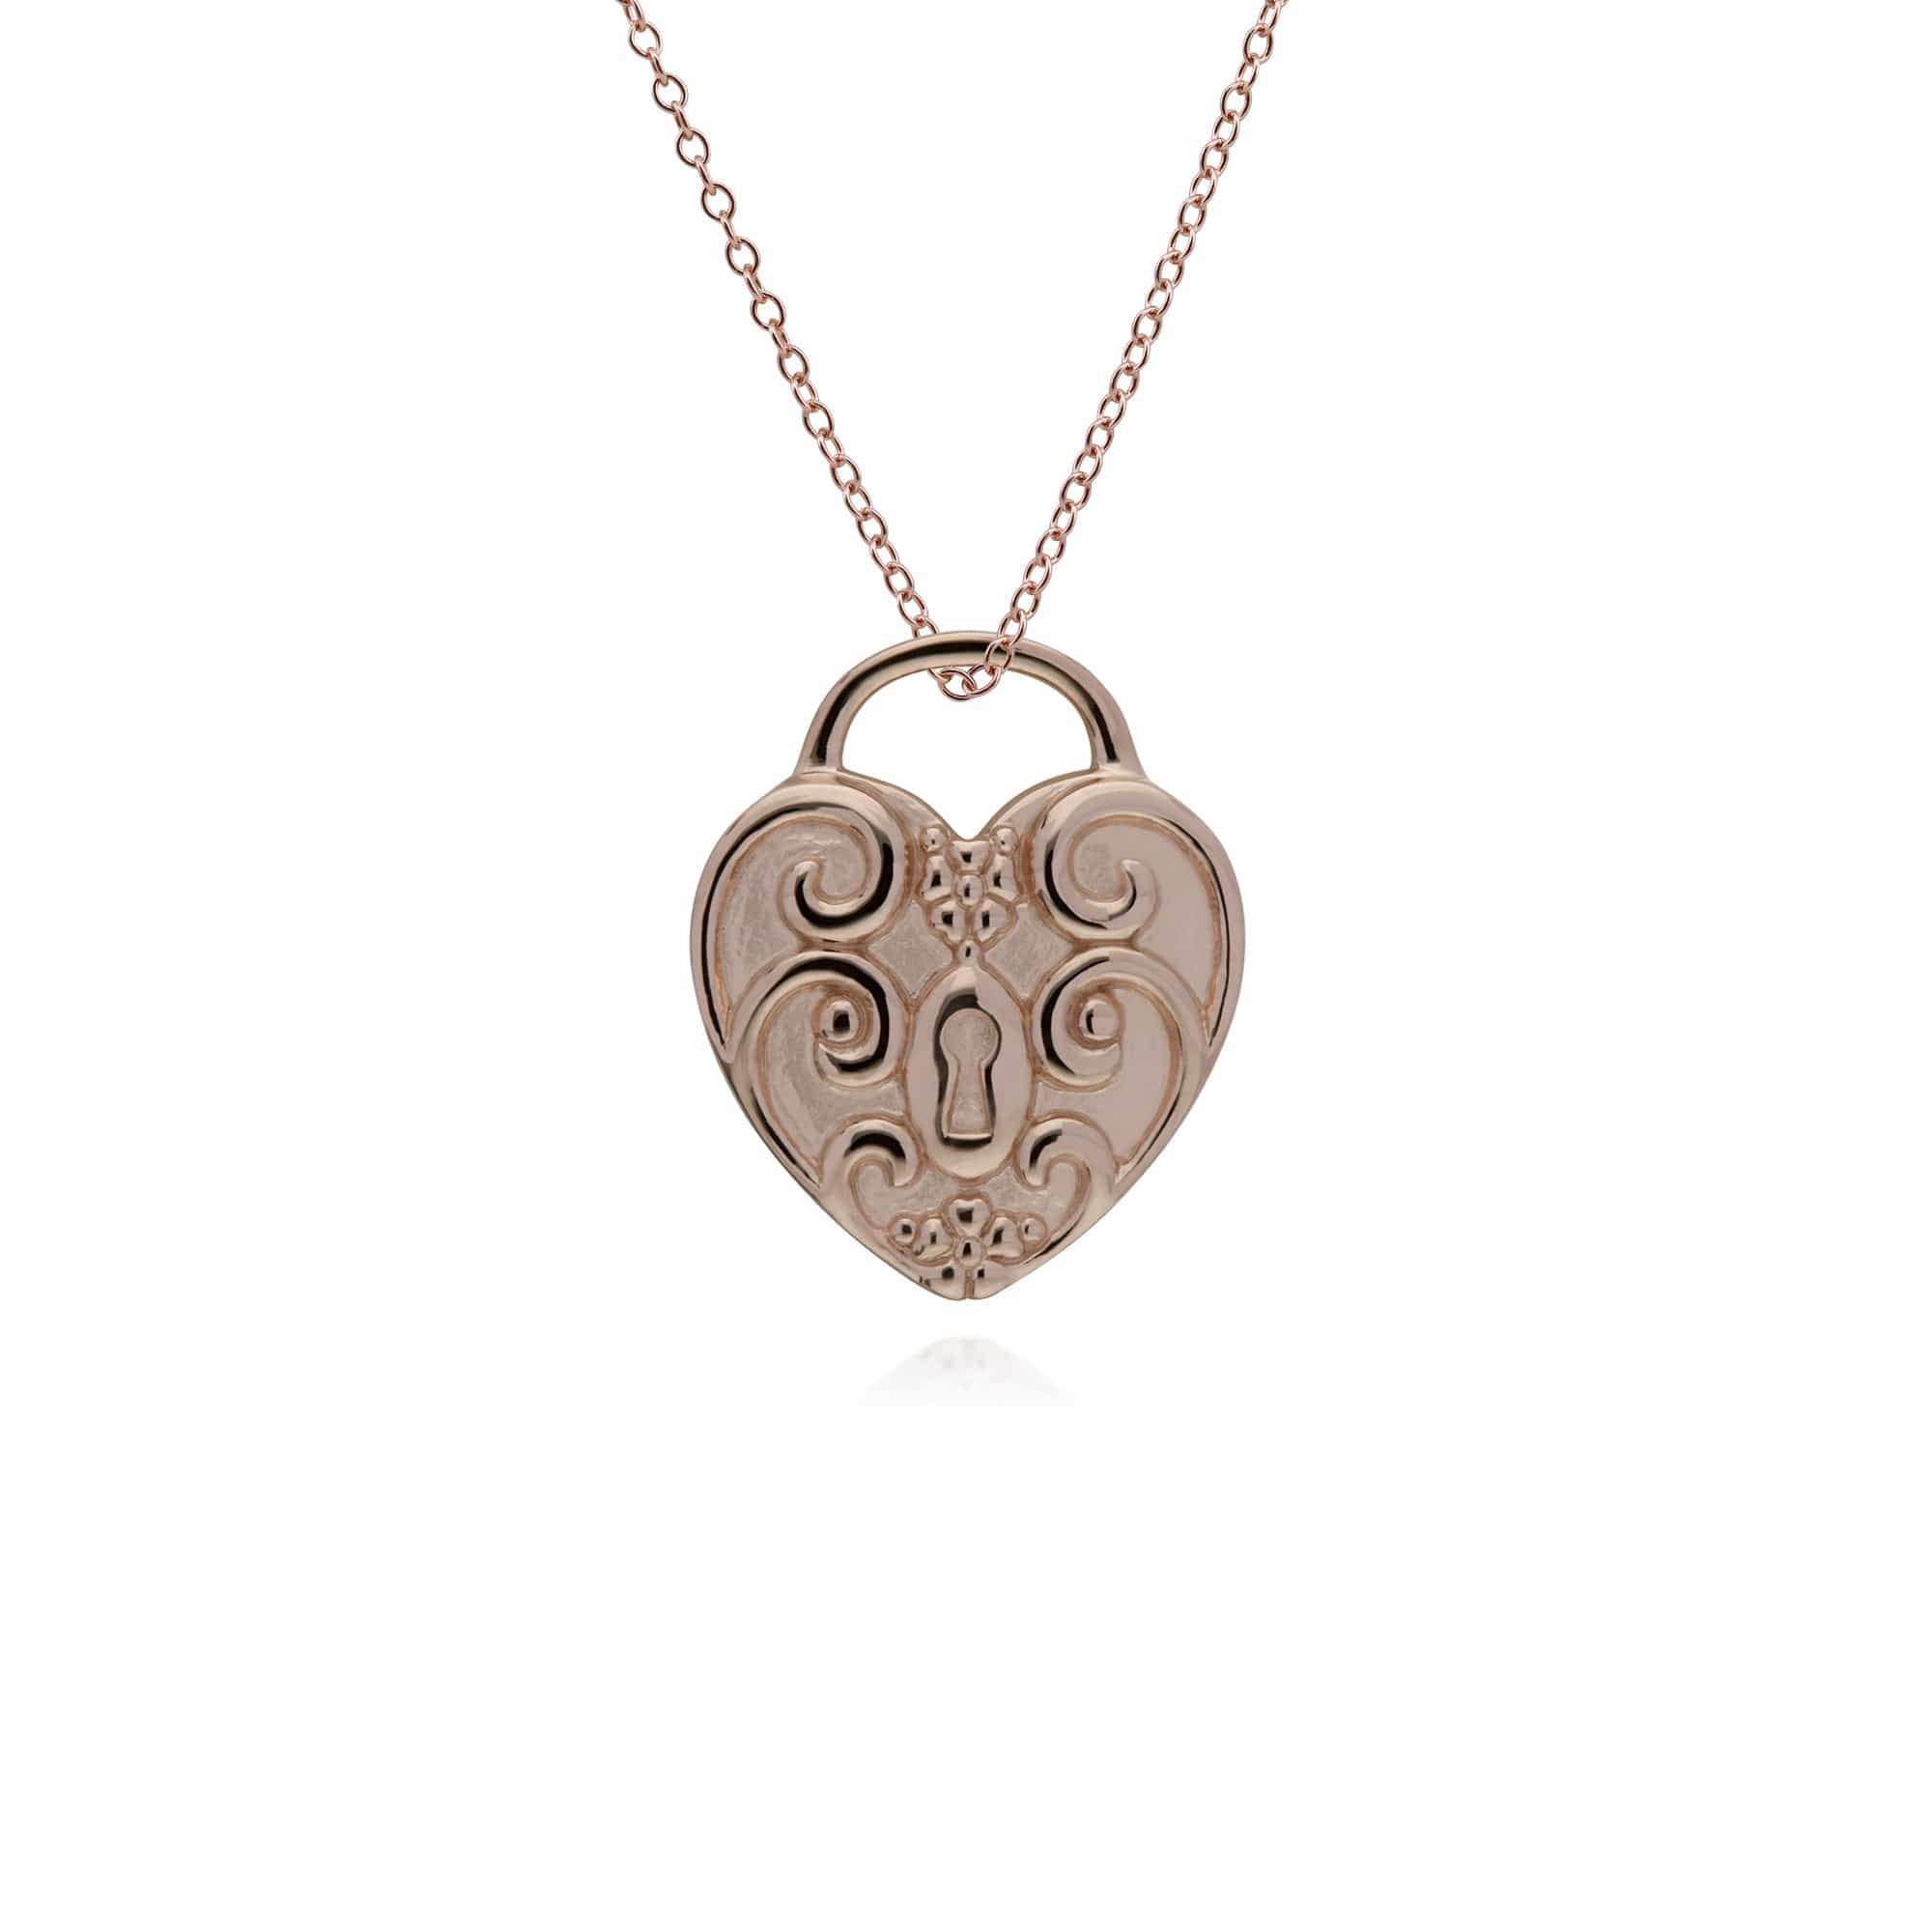 270P027101925-270P026501925 Classic Swirl Heart Lock Pendant & Pearl Key Charm in Rose Gold Plated 925 Sterling Silver 3